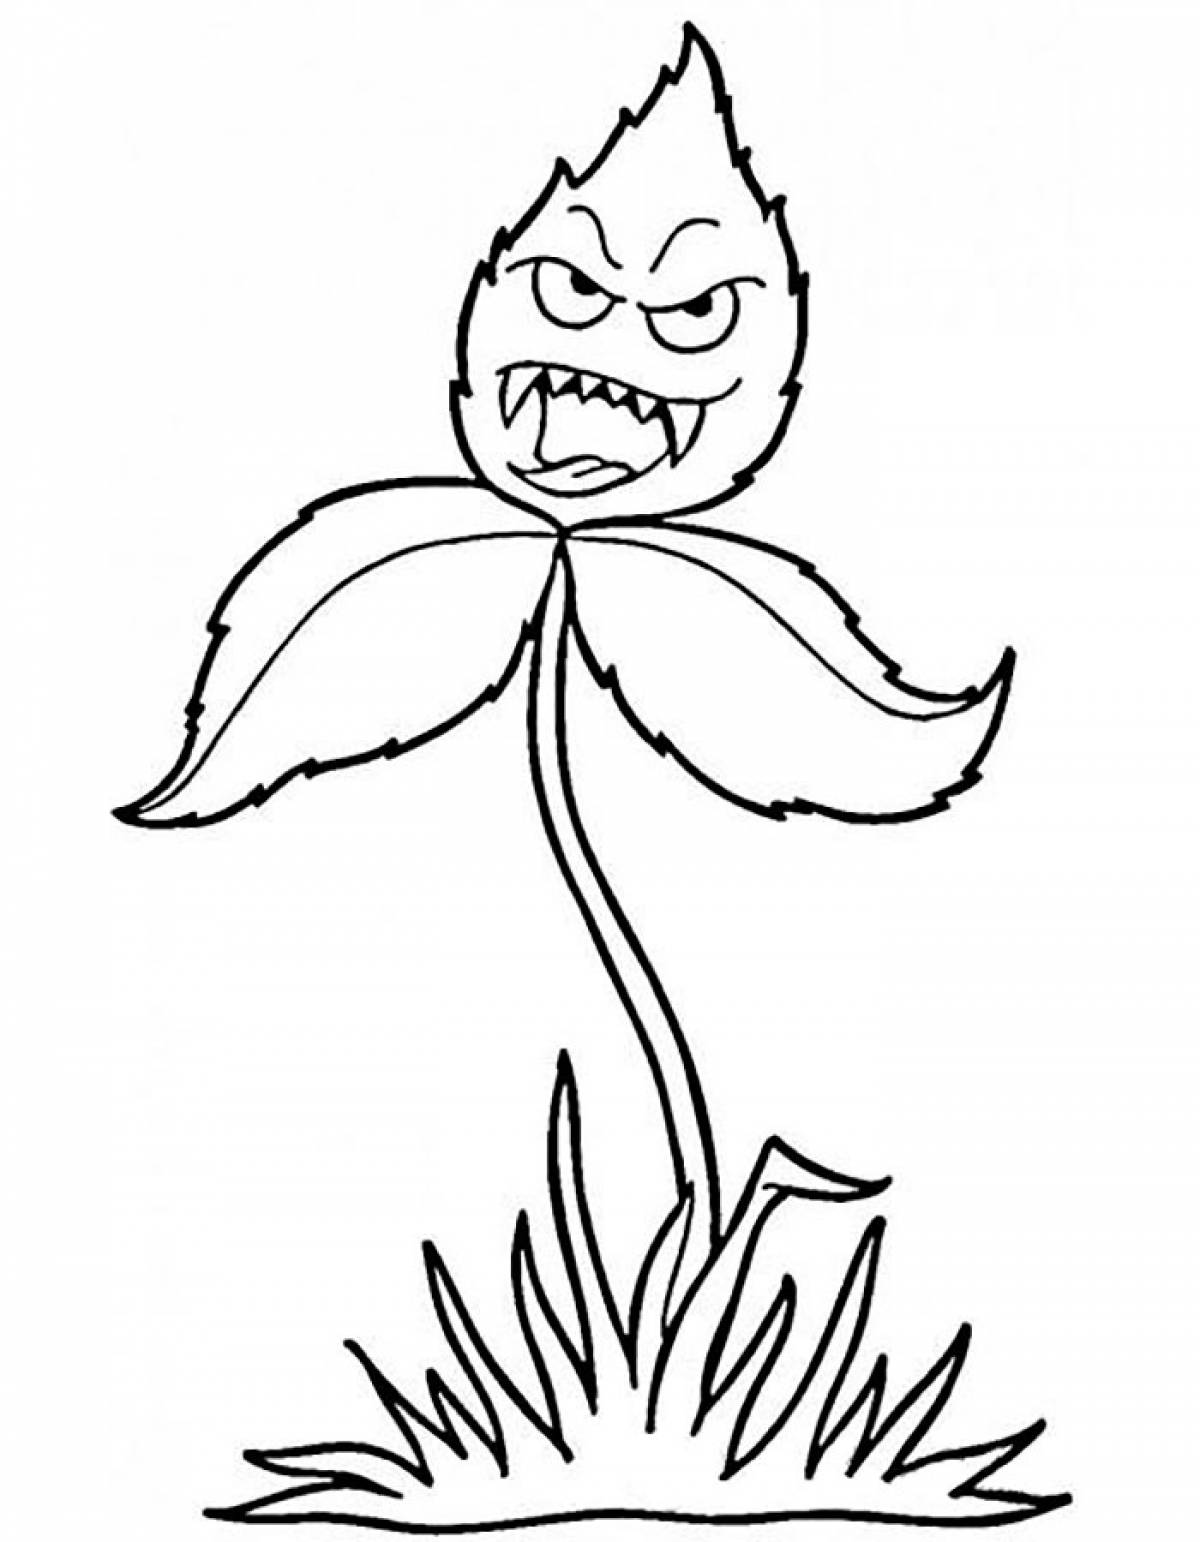 Angry plant